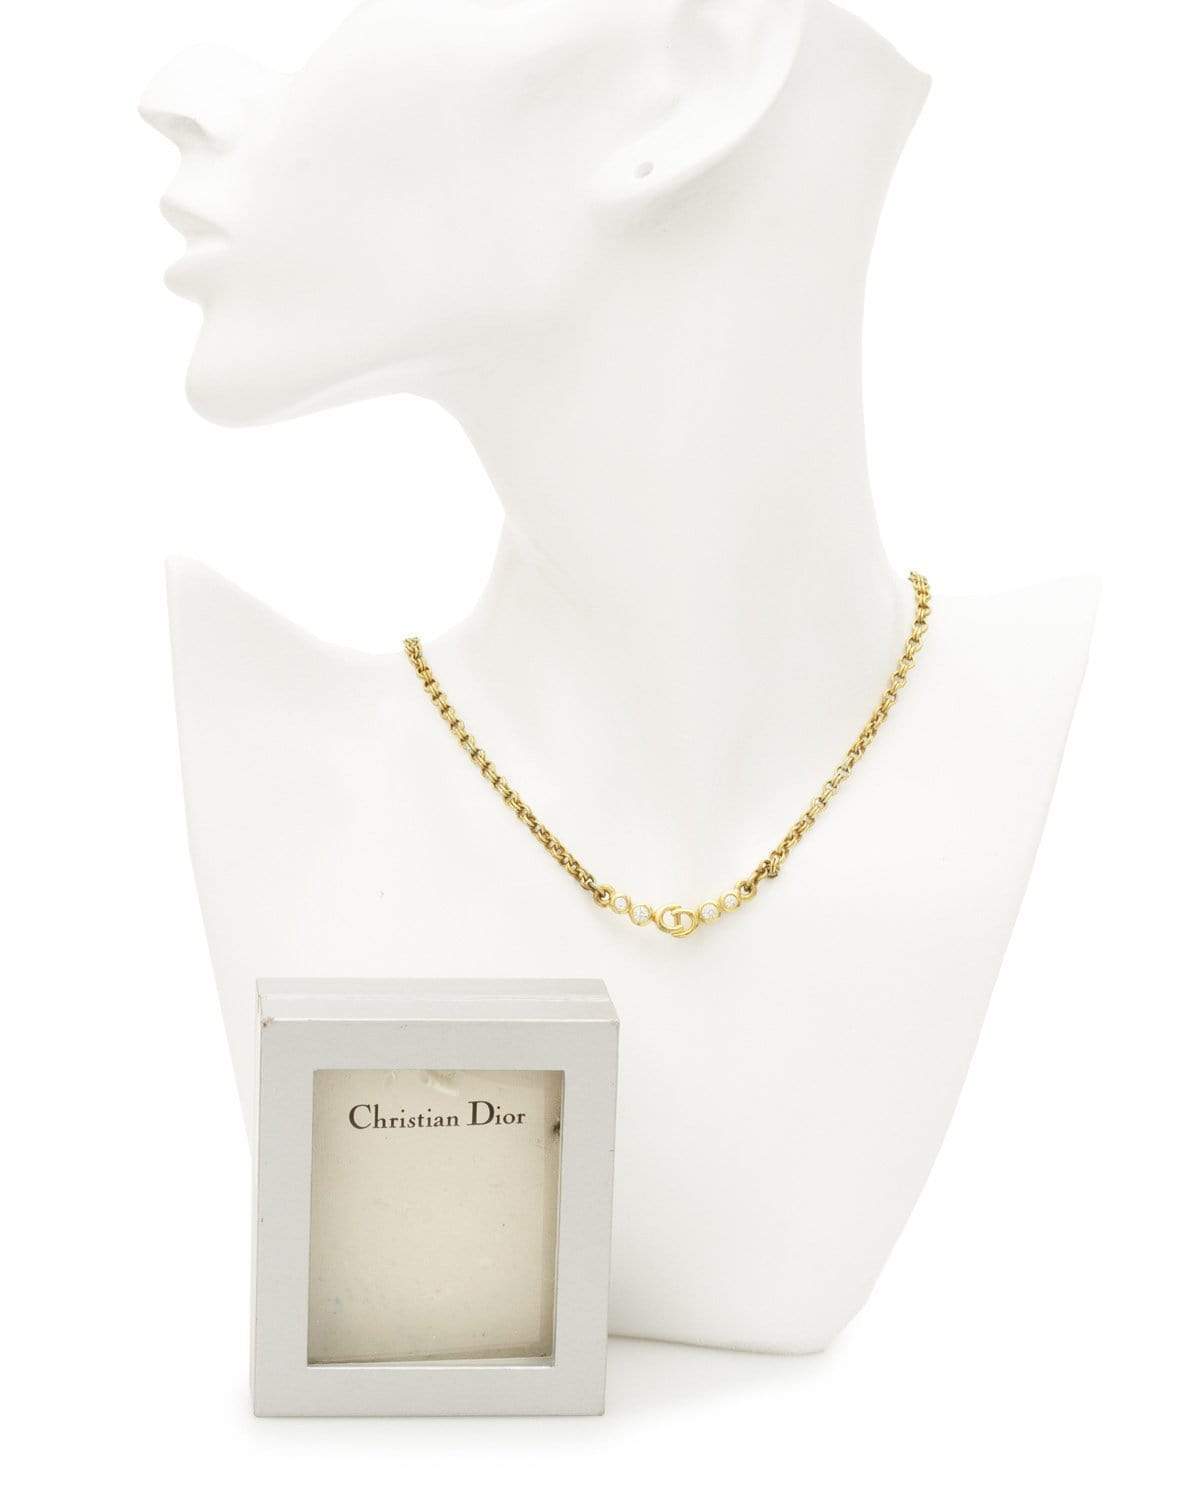 Christian Dior Dior CD Rhinestone Necklace Gold Stainless Steel without Nickel AB - AWL1981